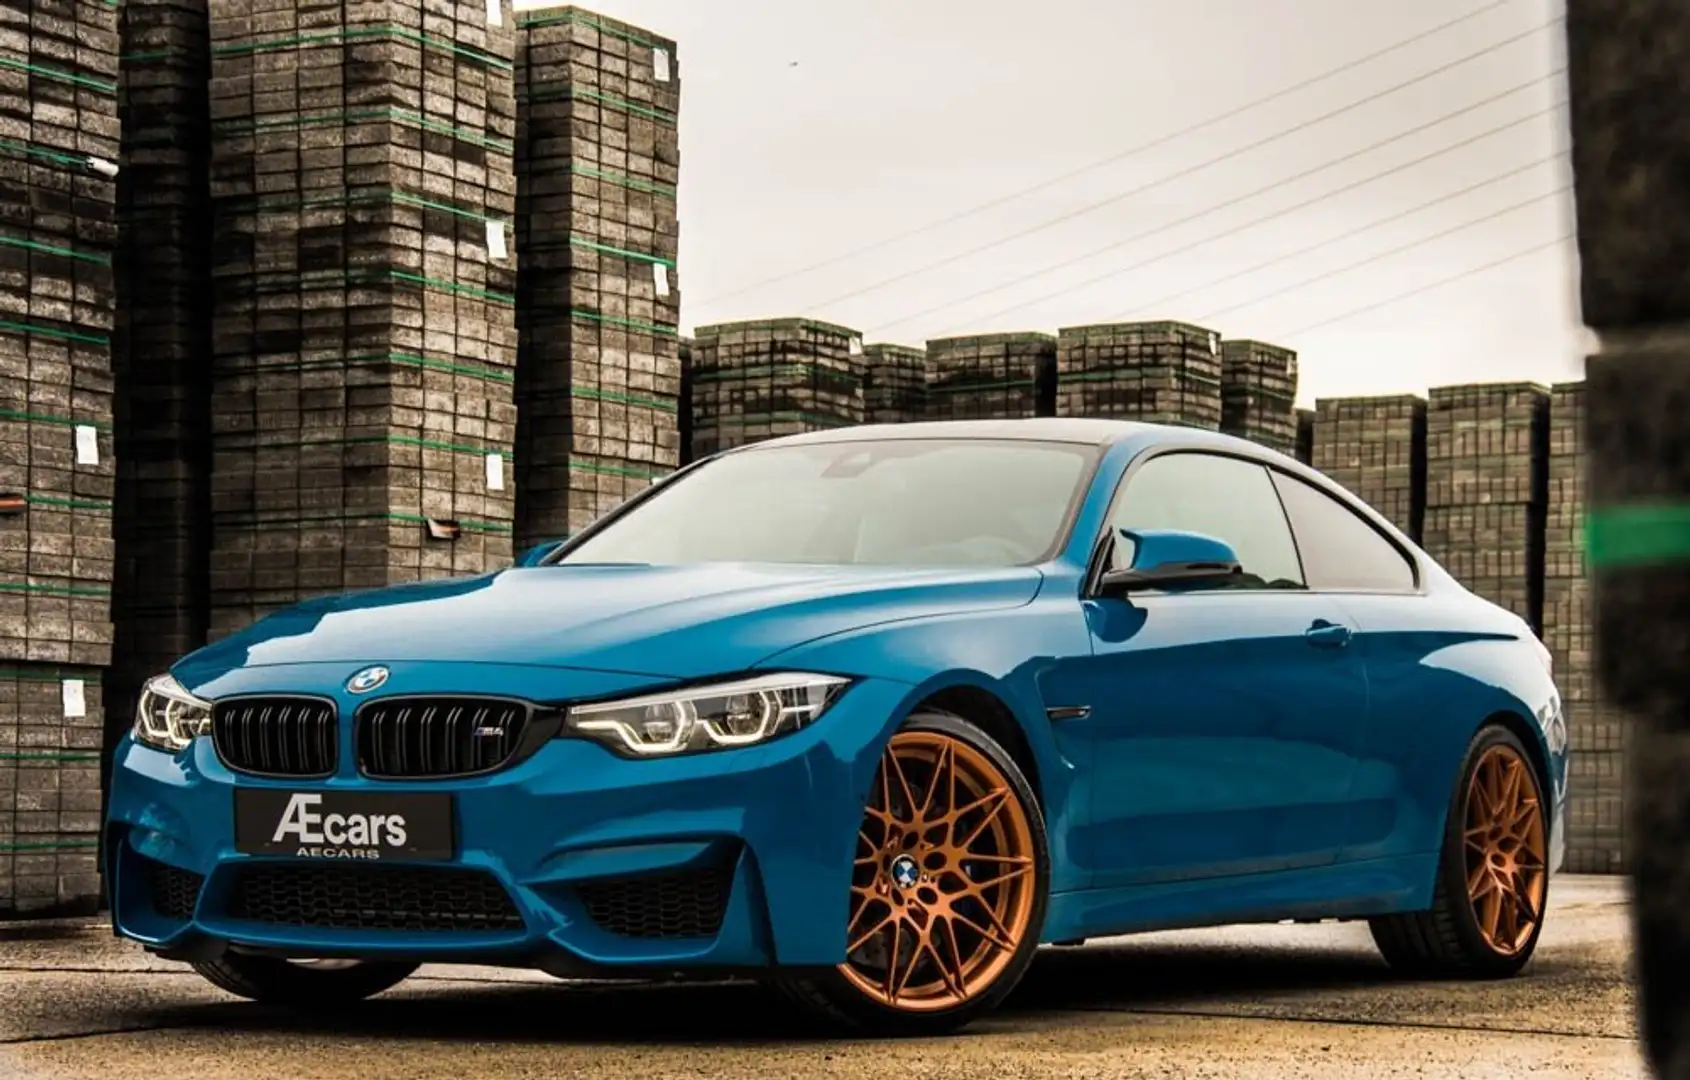 BMW M4 *** COMPETITION HERITAGE / LIMITED 1 OF 750 *** Modrá - 1